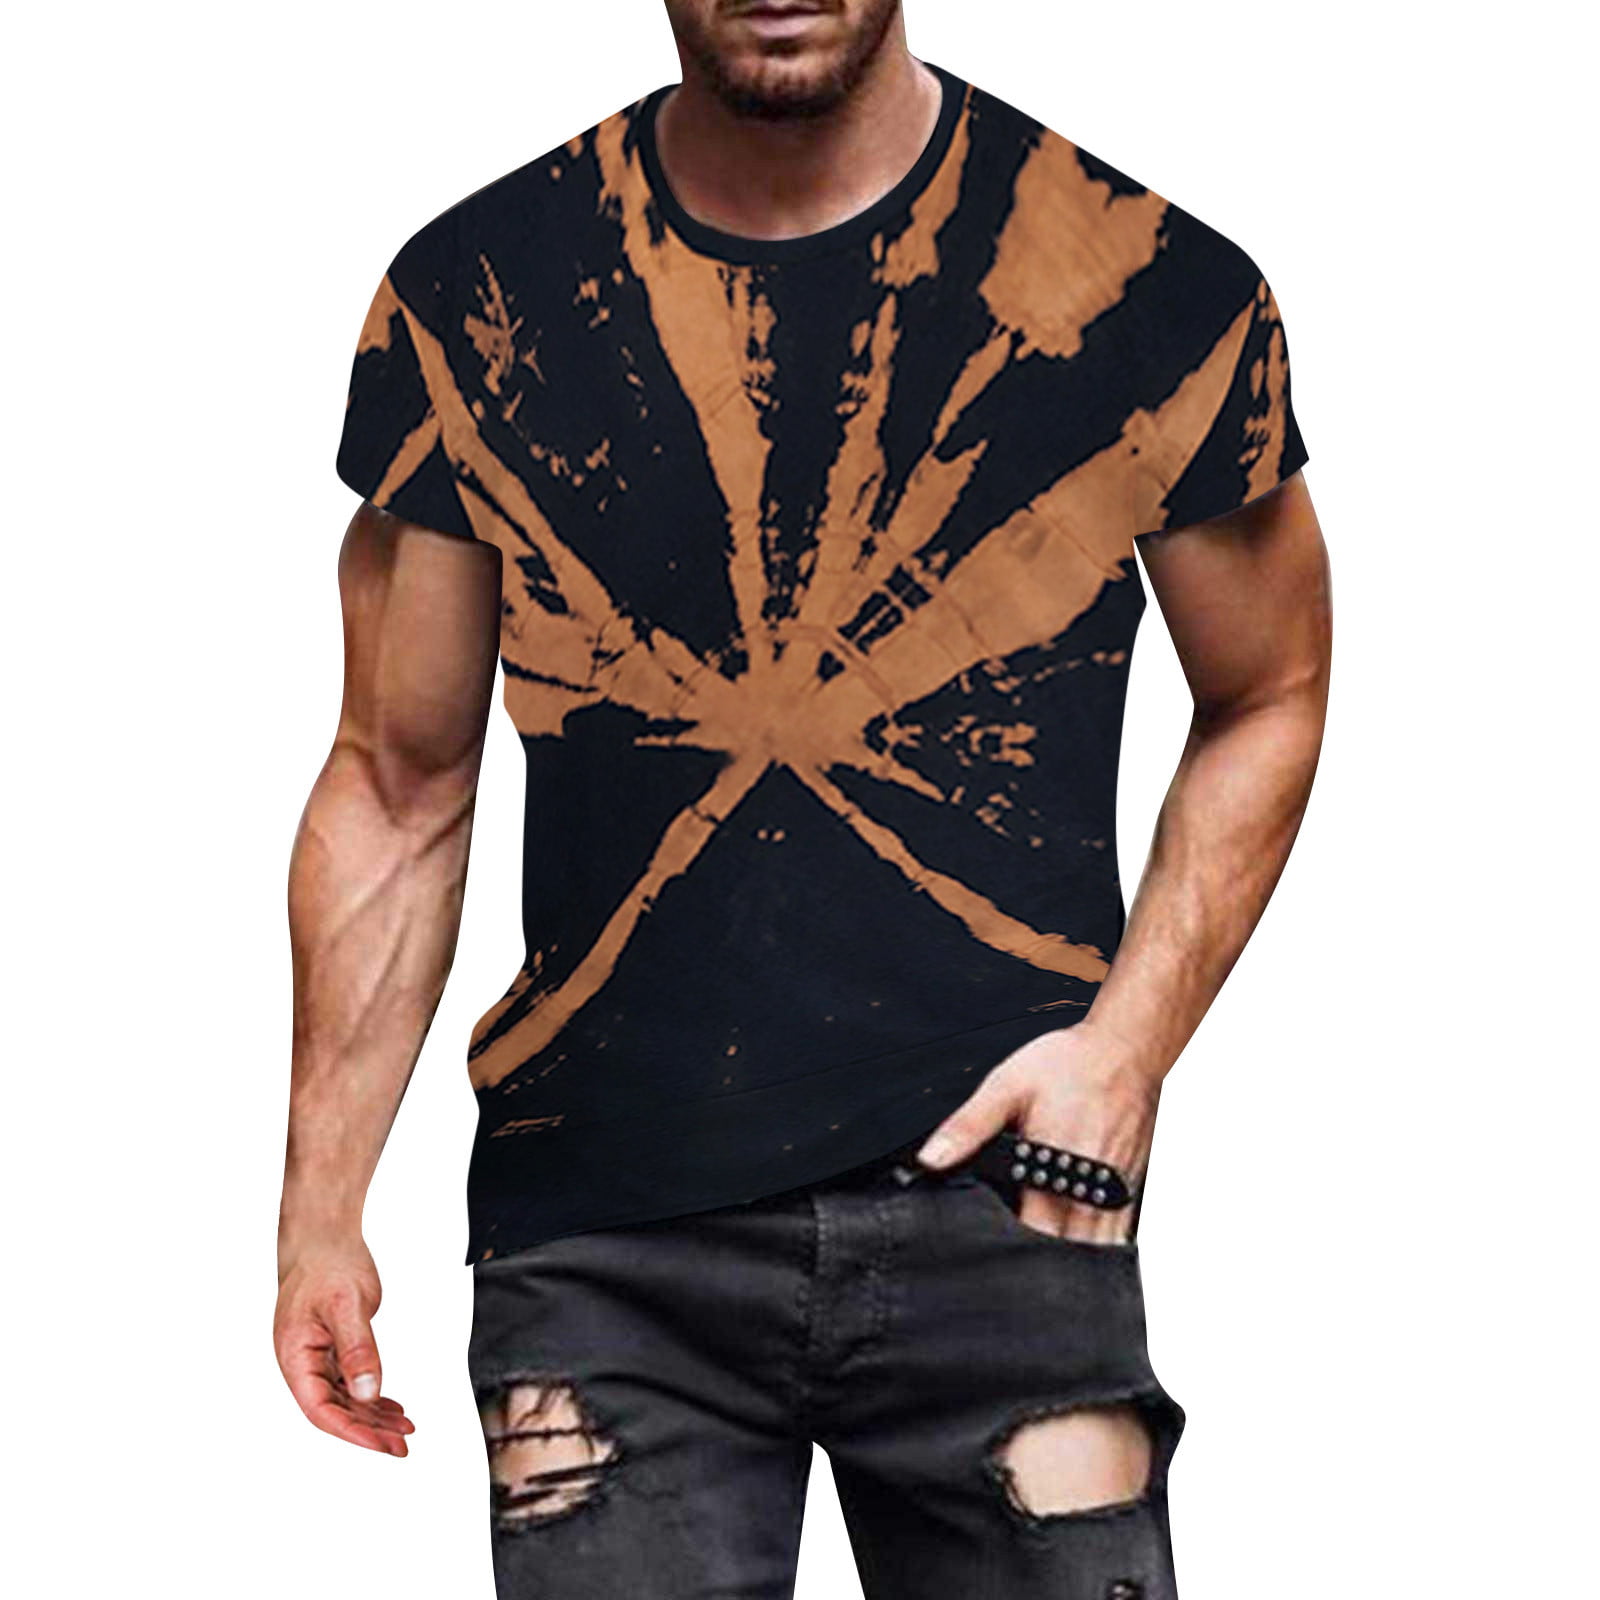 Ambush Cotton T-shirt With Necklace in Black for Men Mens Clothing T-shirts Short sleeve t-shirts 